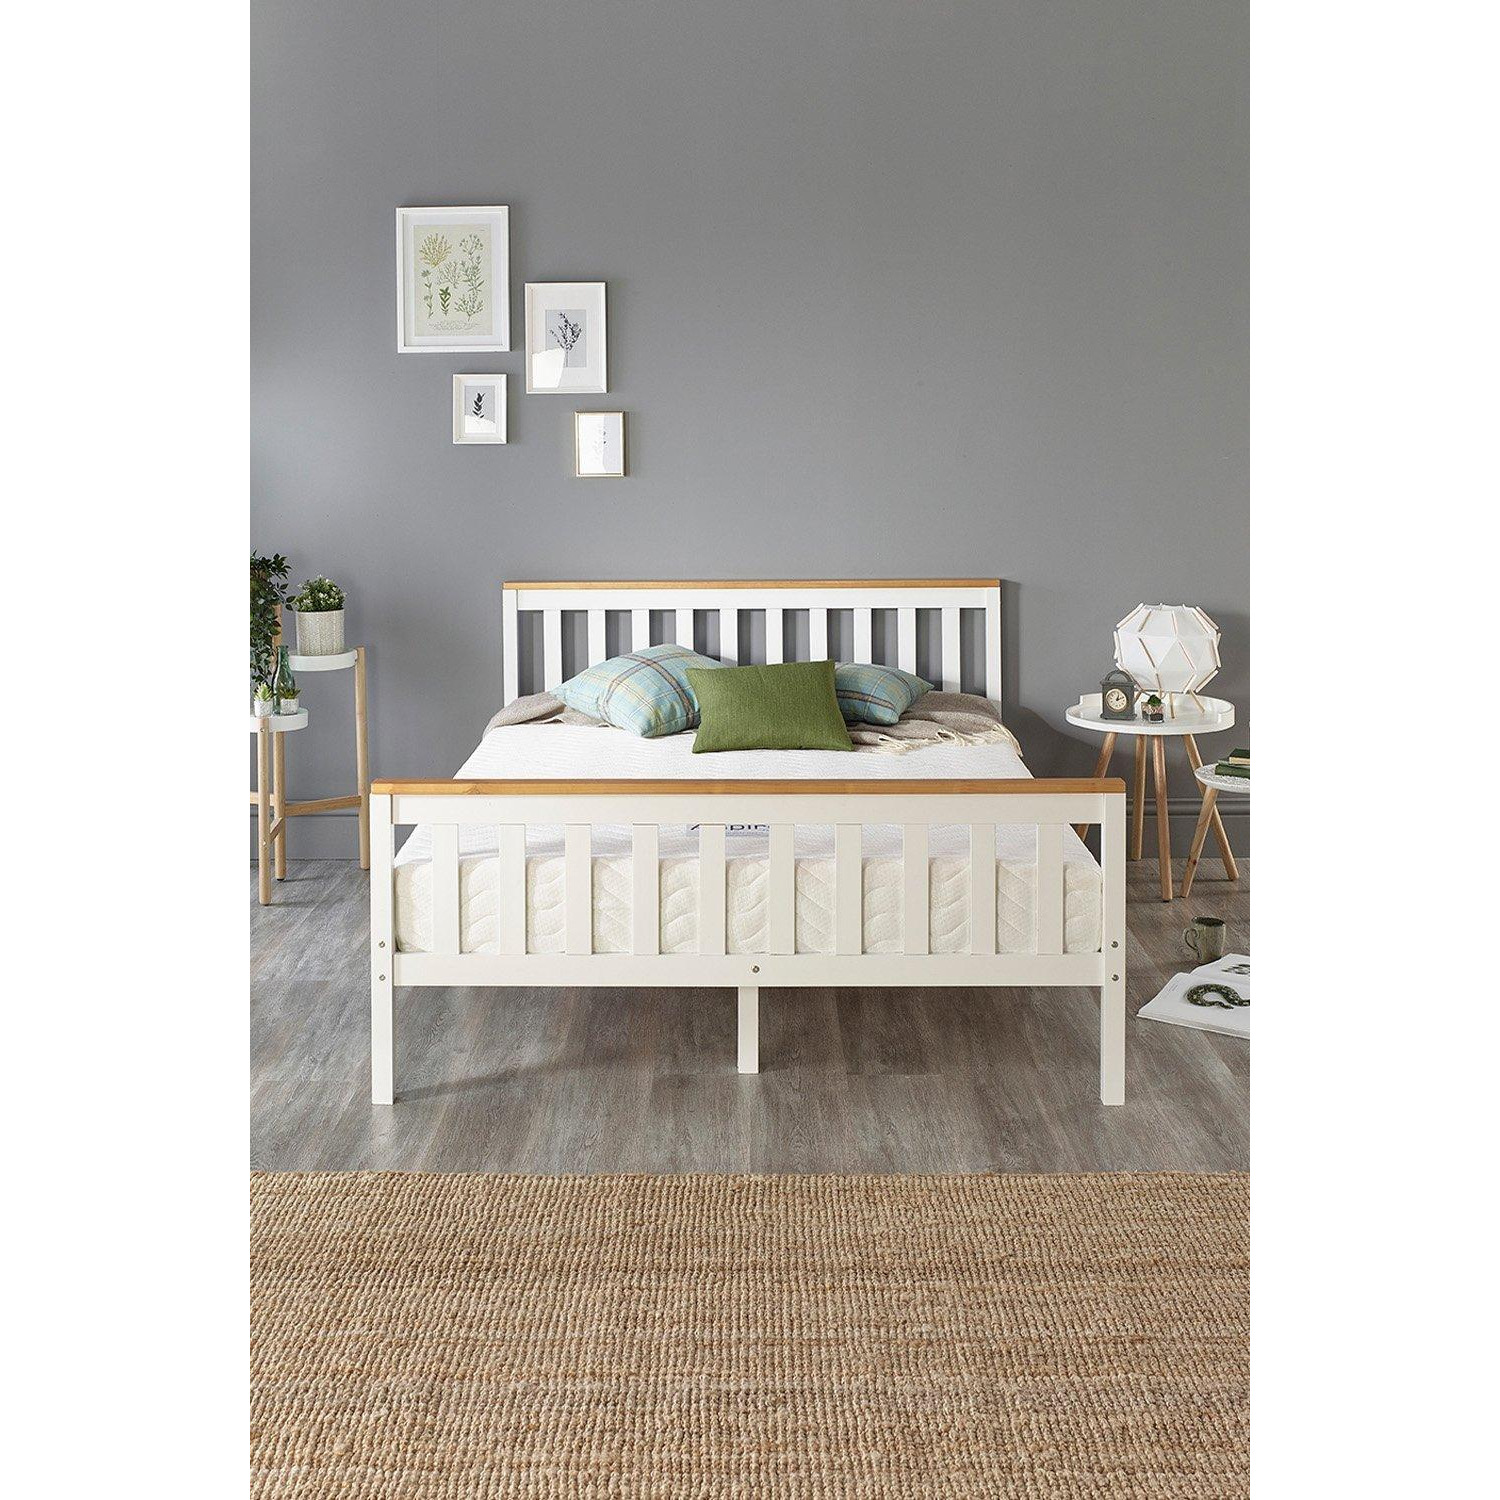 Atlantic Bed Frame in White with Natural Tops - image 1